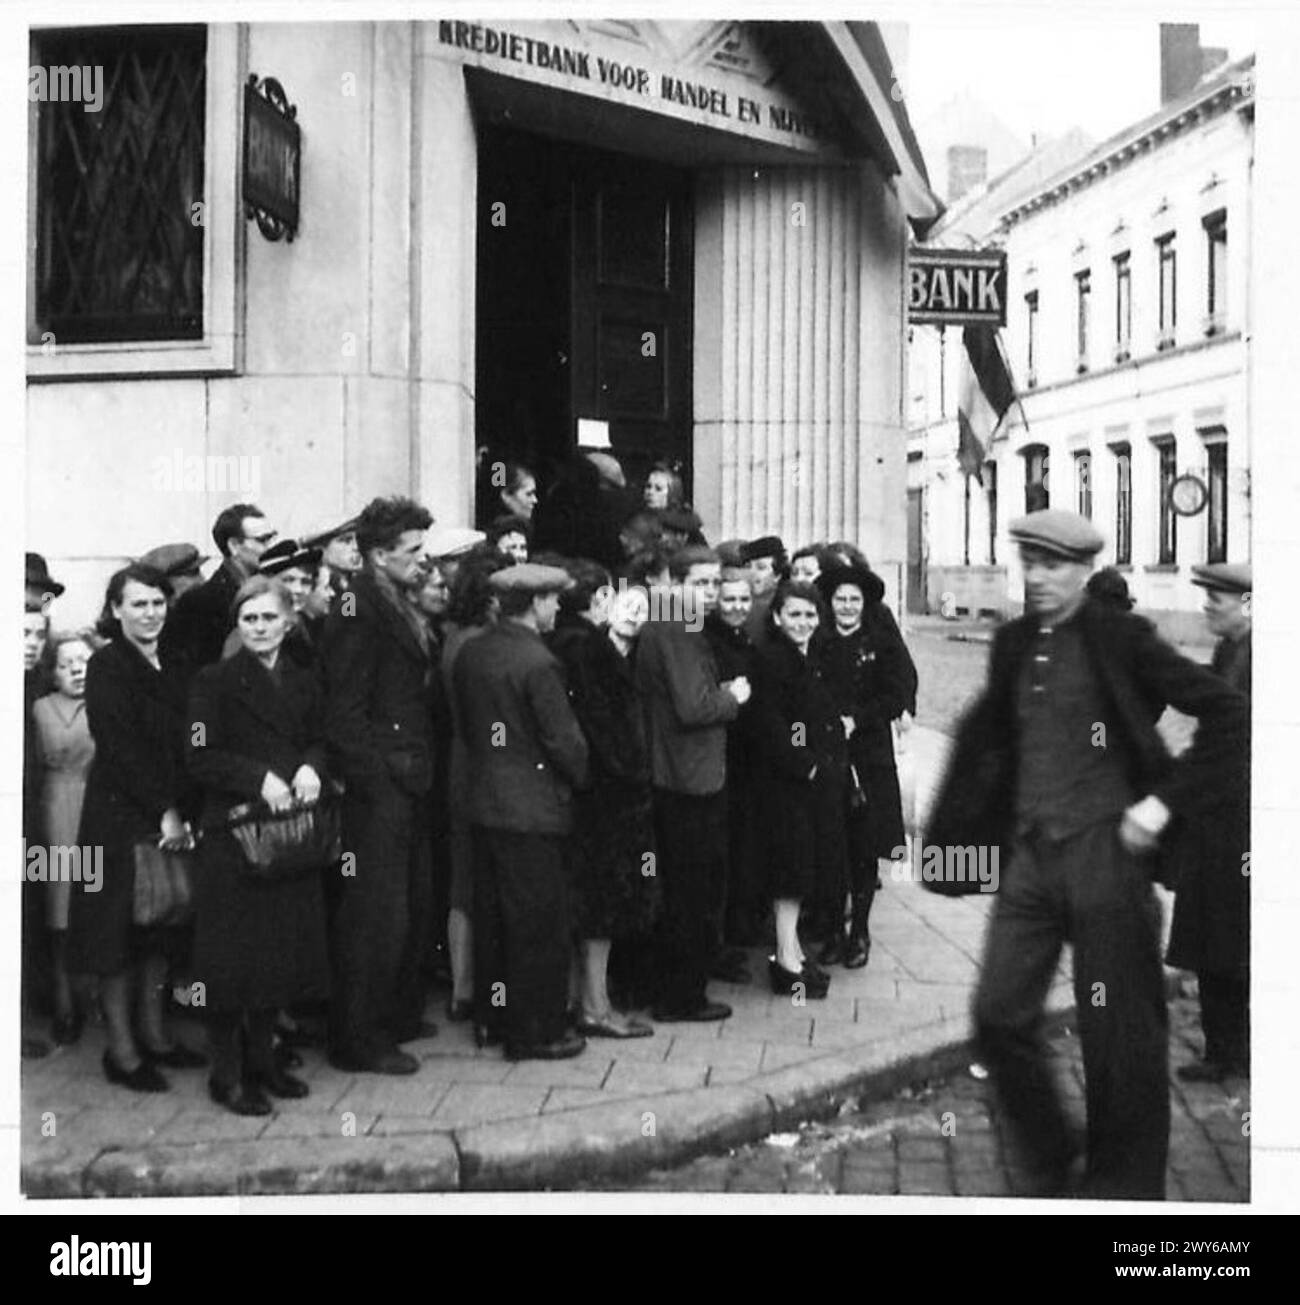 LIFE IN LIBERATED BELGIUM - To avoid inflation: The Germans flooded Belgium, as they did in other countries, with money.. To avoid a financial catastrophe, all the money circulated by the Germans is being withdrawn by the Belgian Government to enable them to assess the amount of supurious coinage. Here are civilians queuing outside a bank to receive new issue notes in exchange for the old. , British Army, 21st Army Group Stock Photo